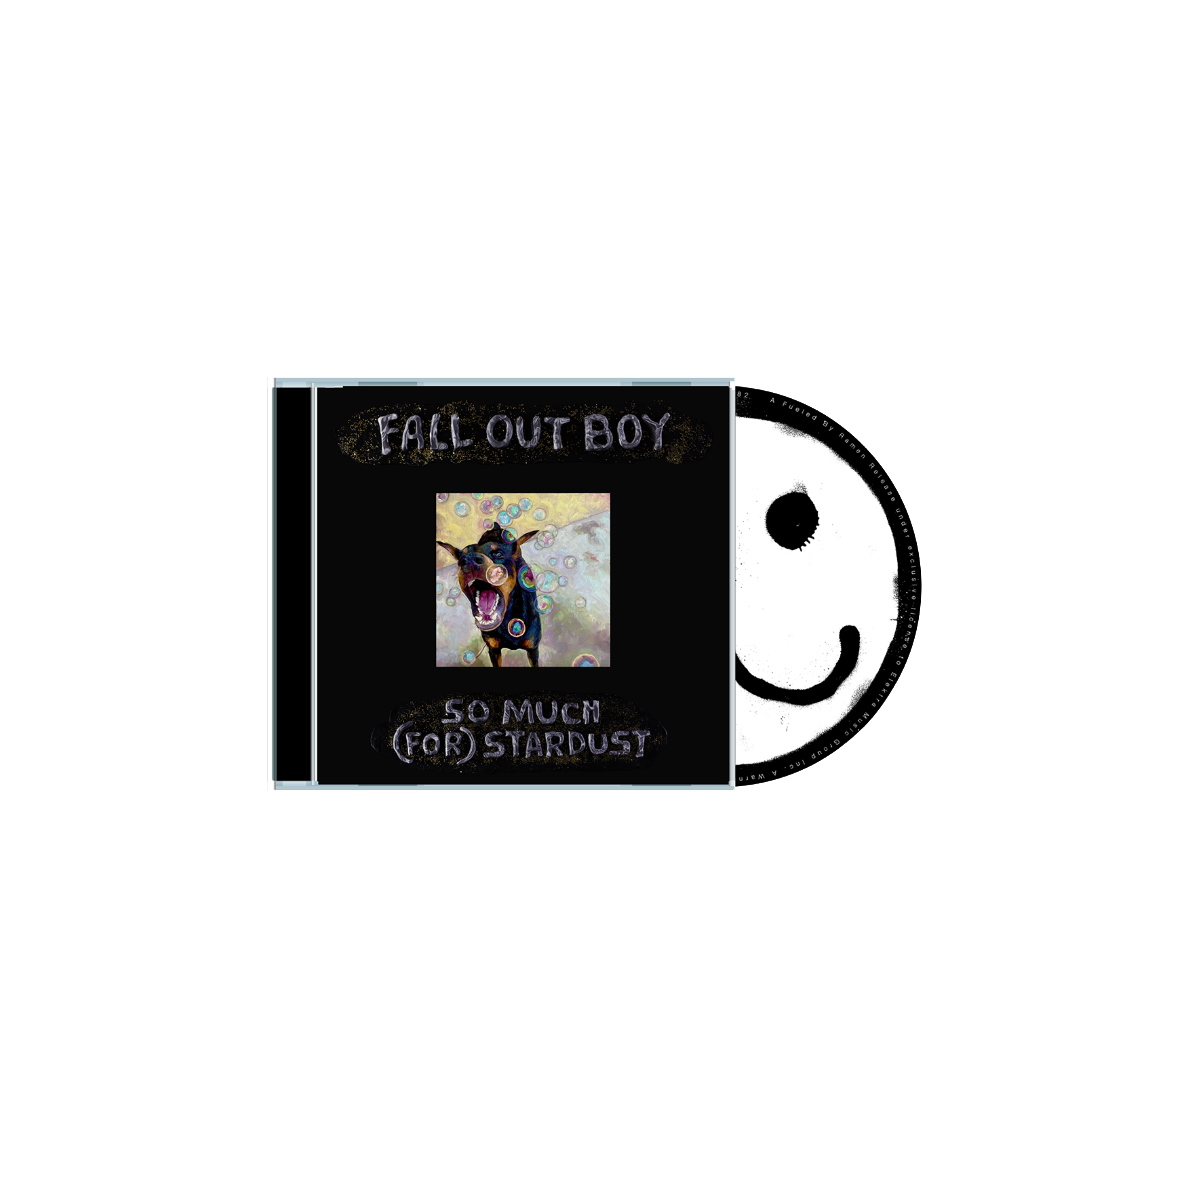 Fall Out Boy - So Much (For) Stardust: CD